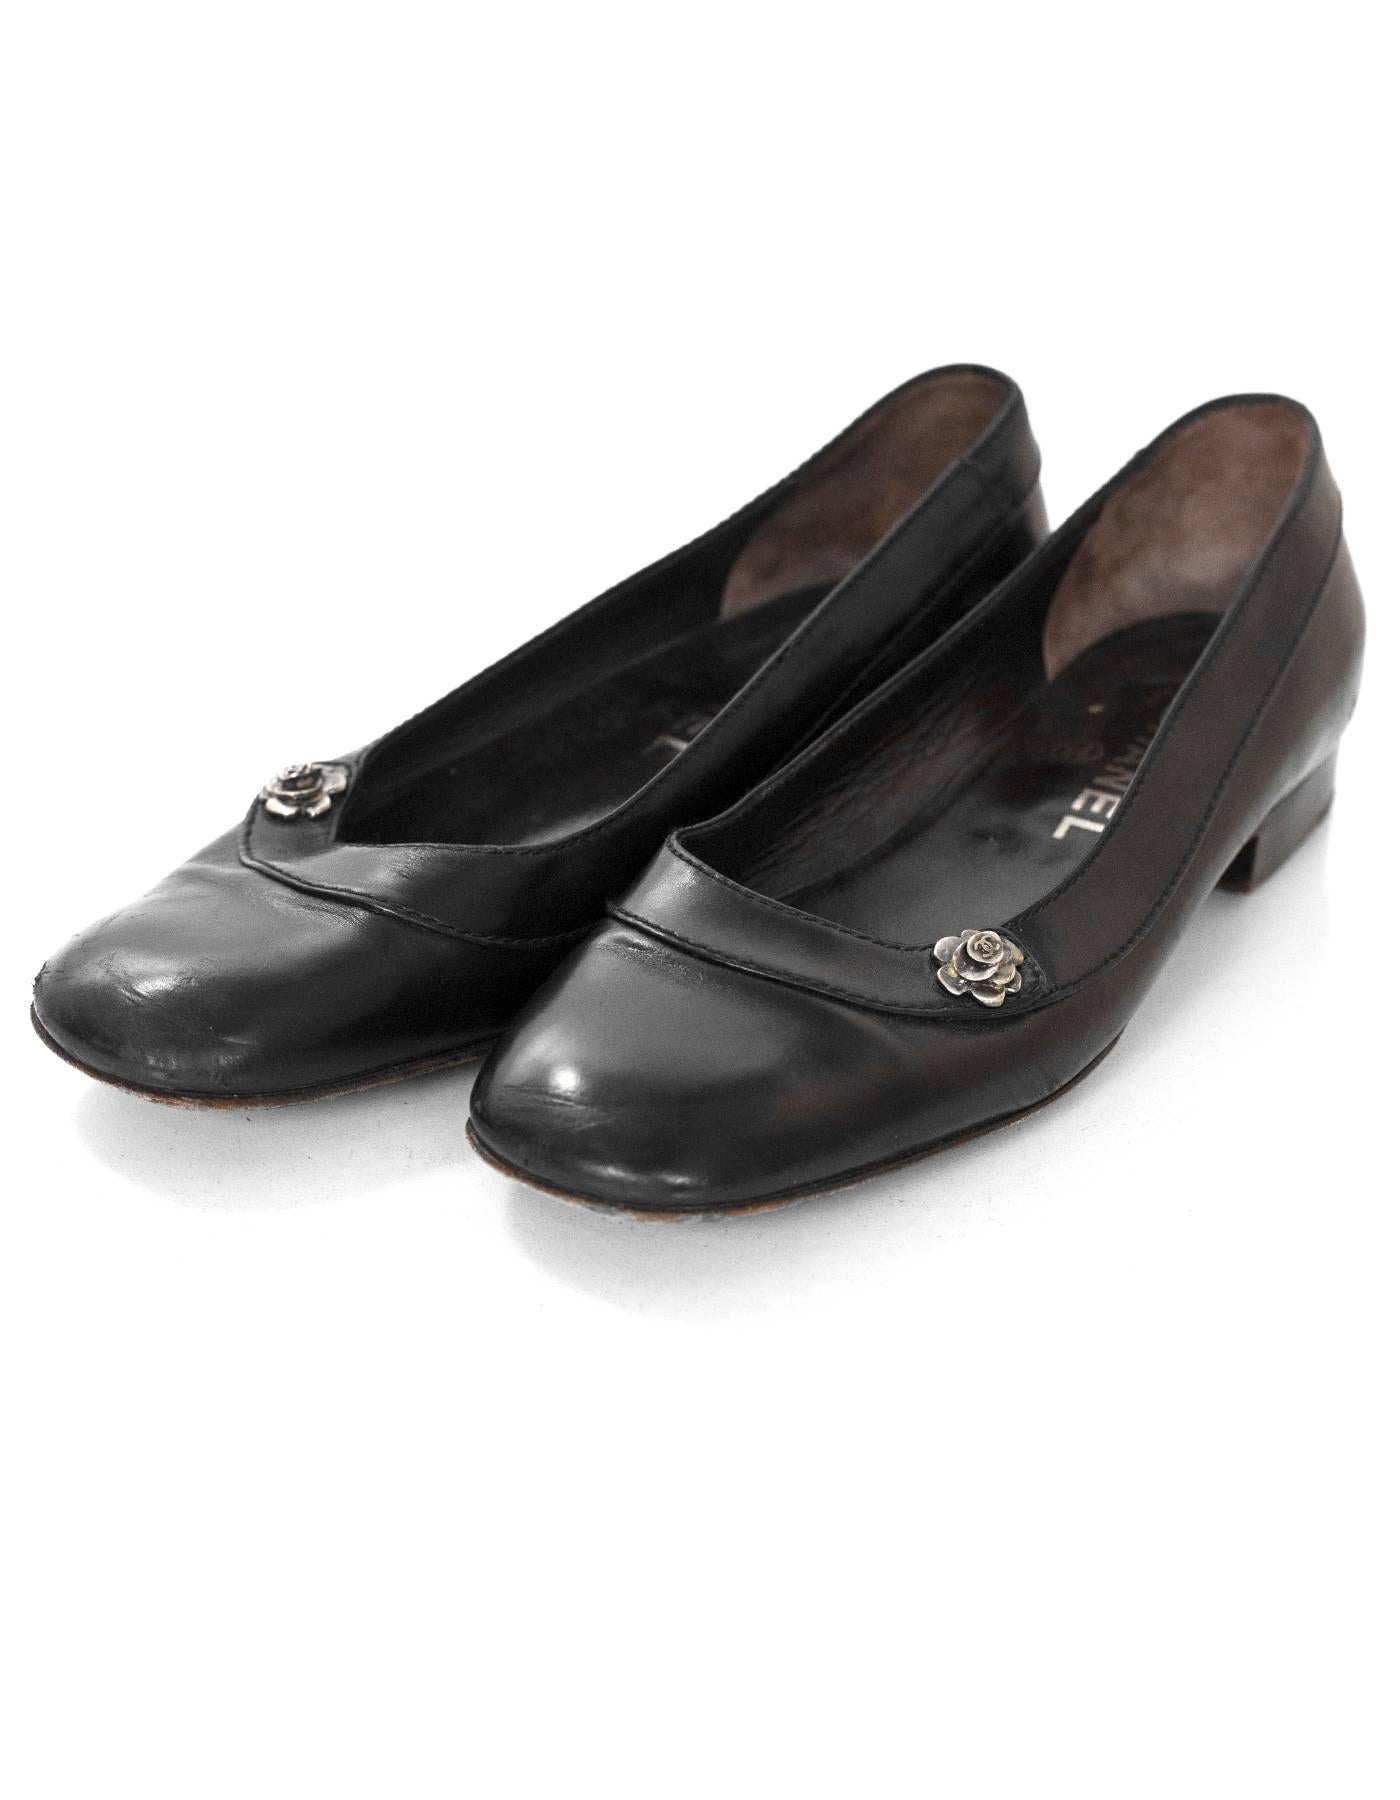 Chanel Black Leather Flats with Camellia Flower Sz 36.5

Made In: Italy
Color: Black
Composition: Leather
Sole Stamp: CC Made in Italy 36.5
Closure/opening: Slide on
Overall Condition: Very good pre-owed conditon with the exception of worn outsoles,